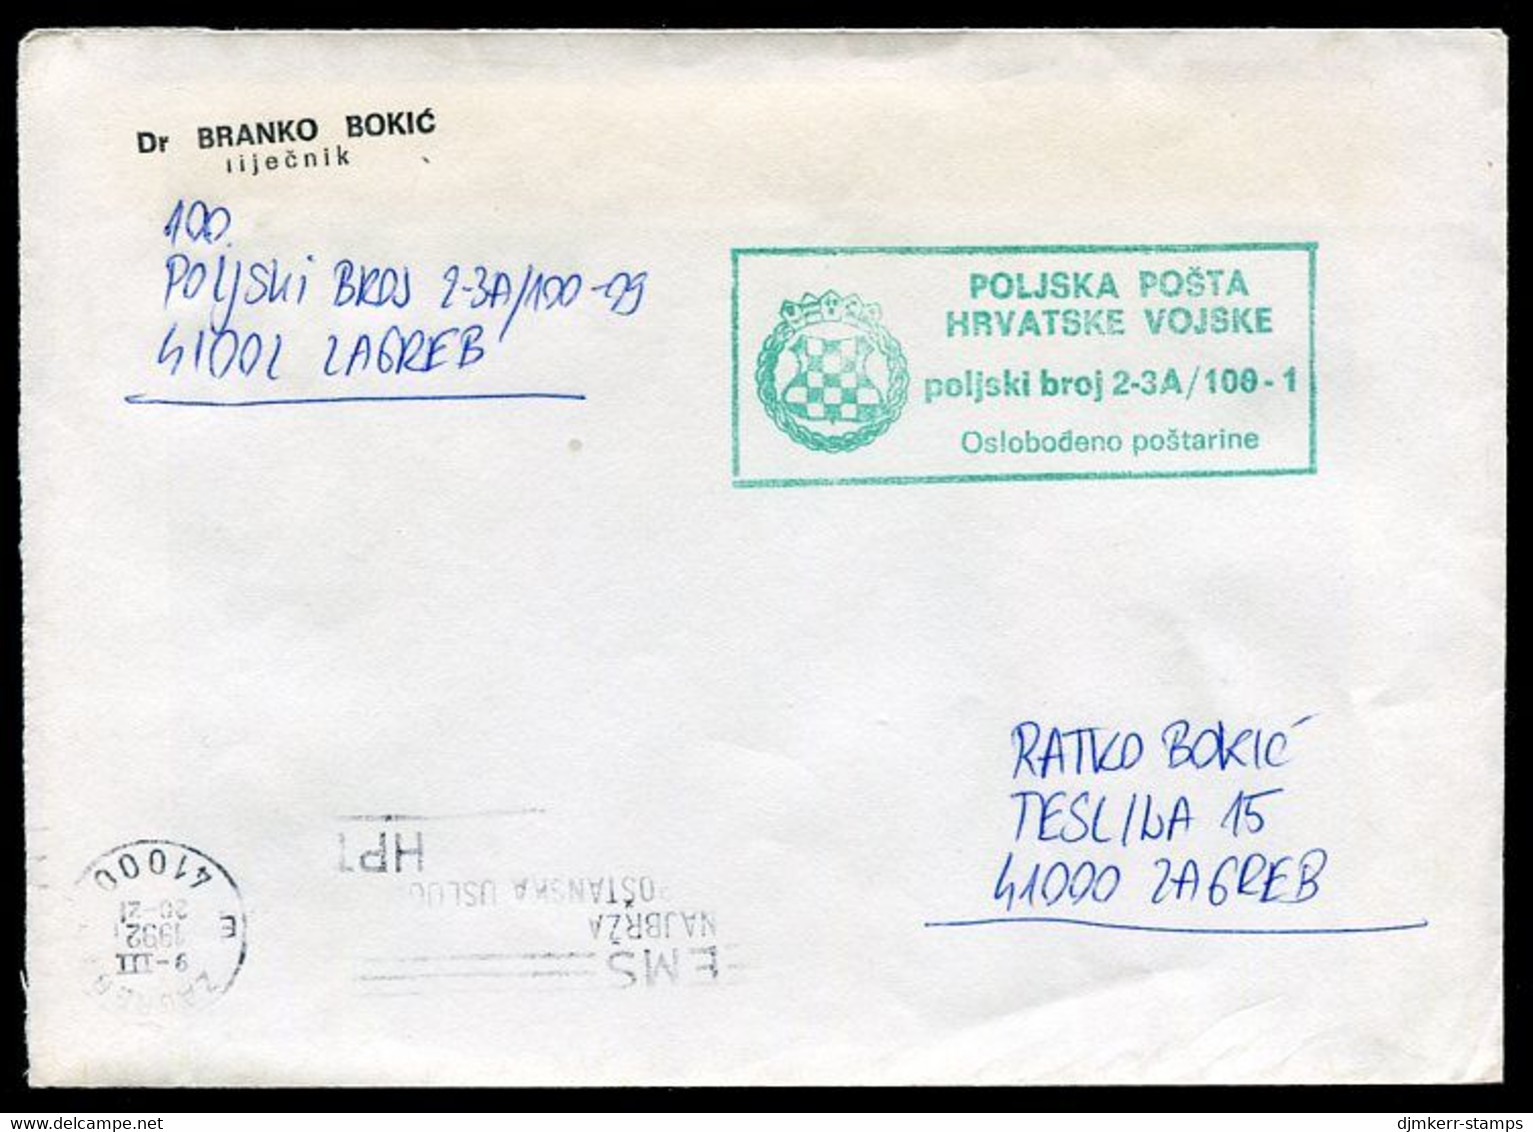 CROATIA 1992 Stampless Cover With Field Post Office Cachet Sent During War With Serbia. - Croatia